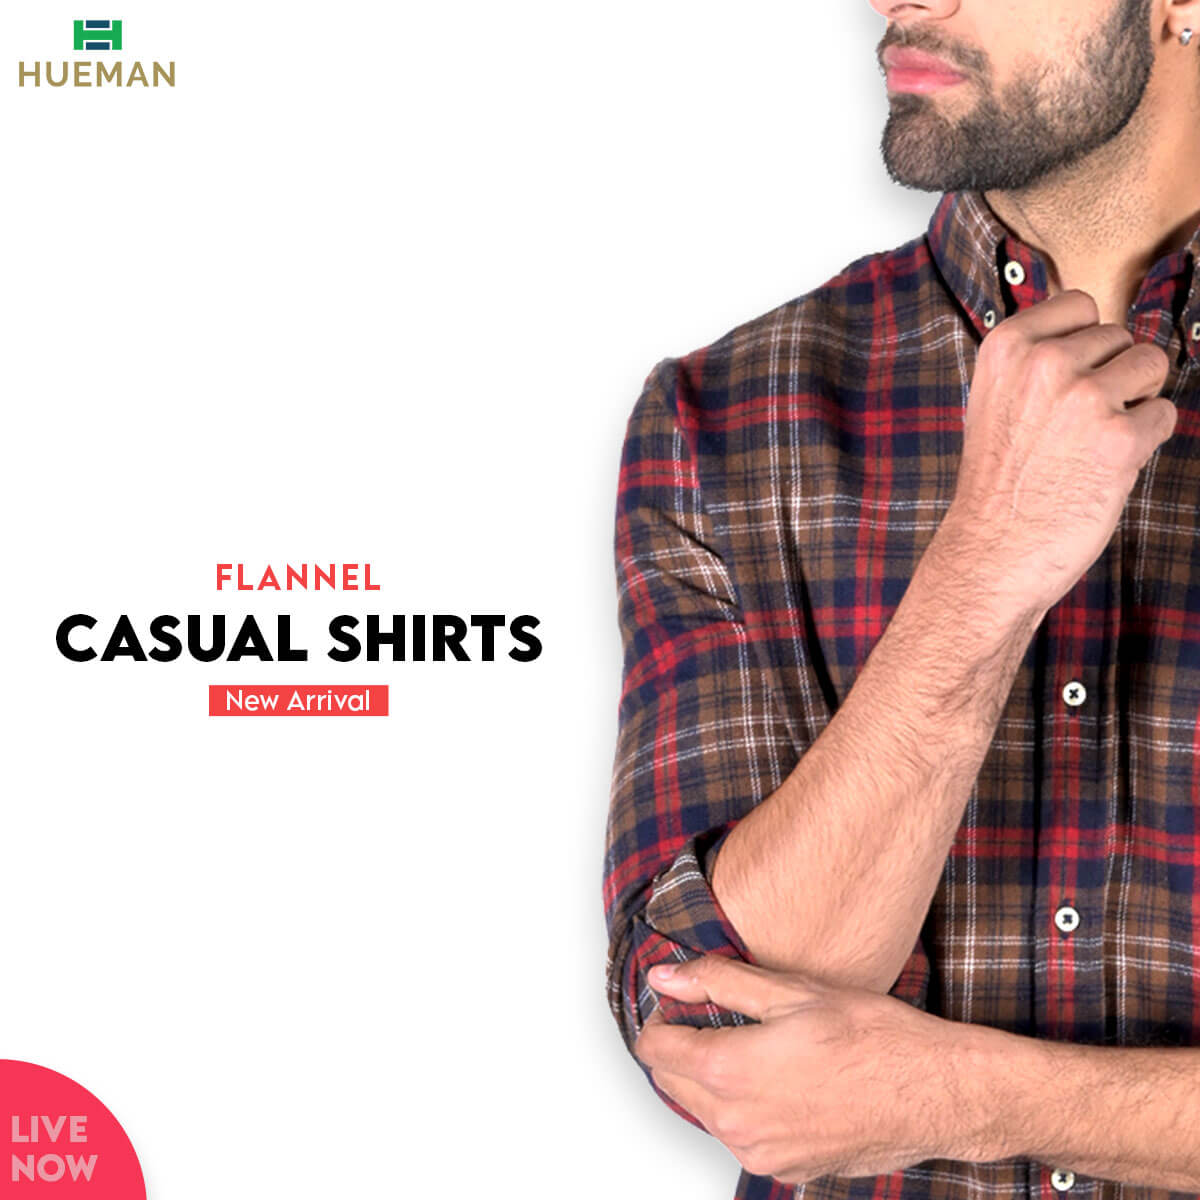 How Do We Casually Style a Men&#8217;s Button-Down Shirt? Get Ready for Relaxed Yet Classy Looks